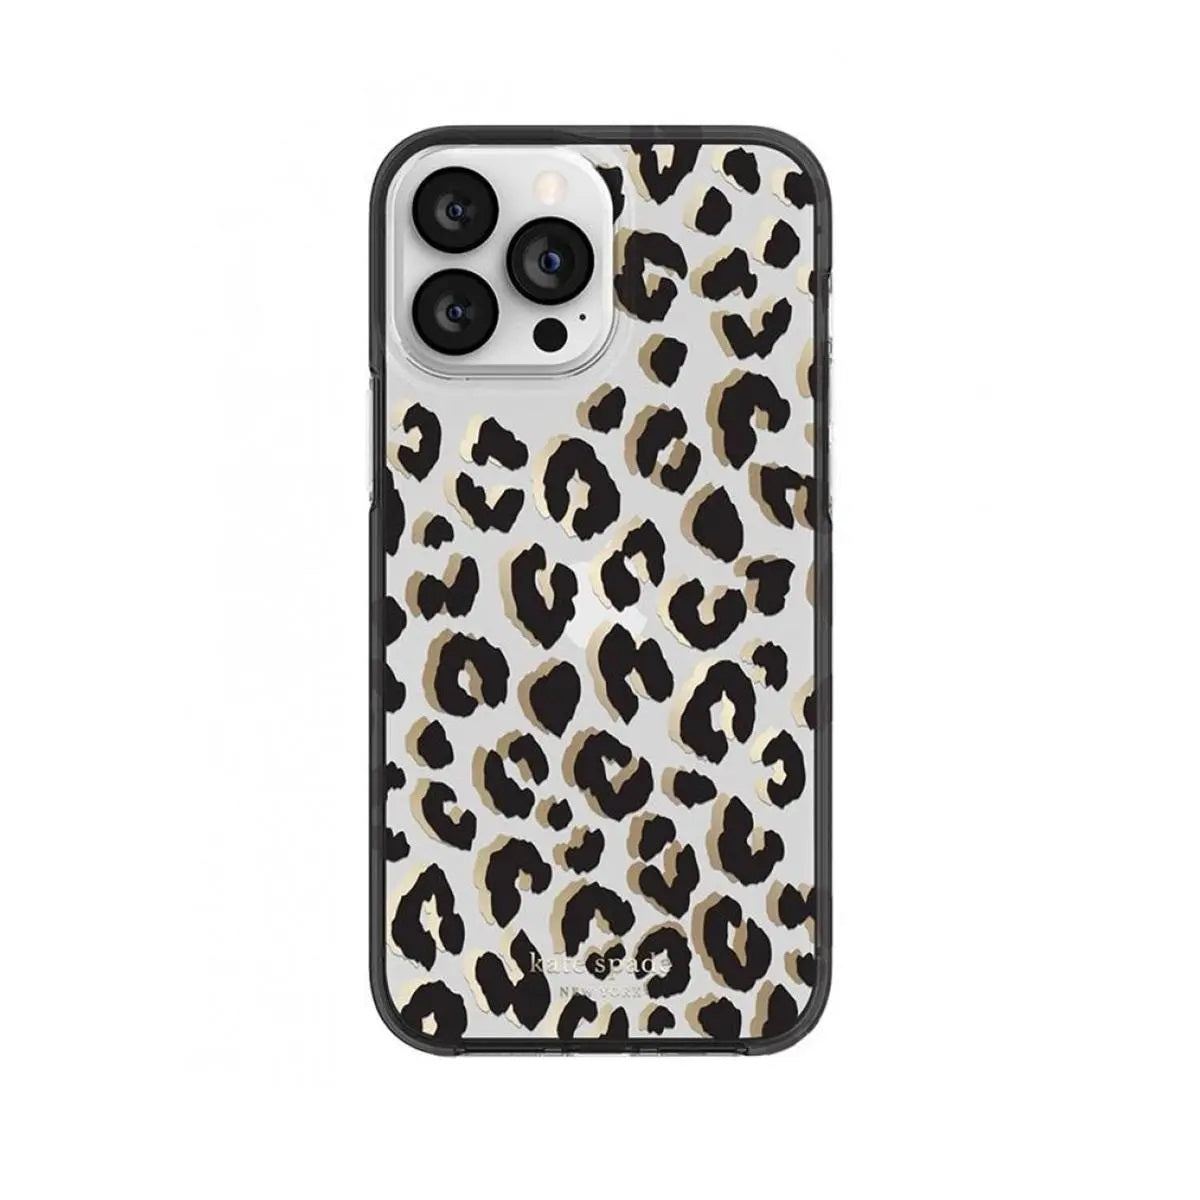 Kate Spade New York Protective Hardshell Case for iPhone 12 Pro Max/ 13 Pro Max (City Leopard Black)